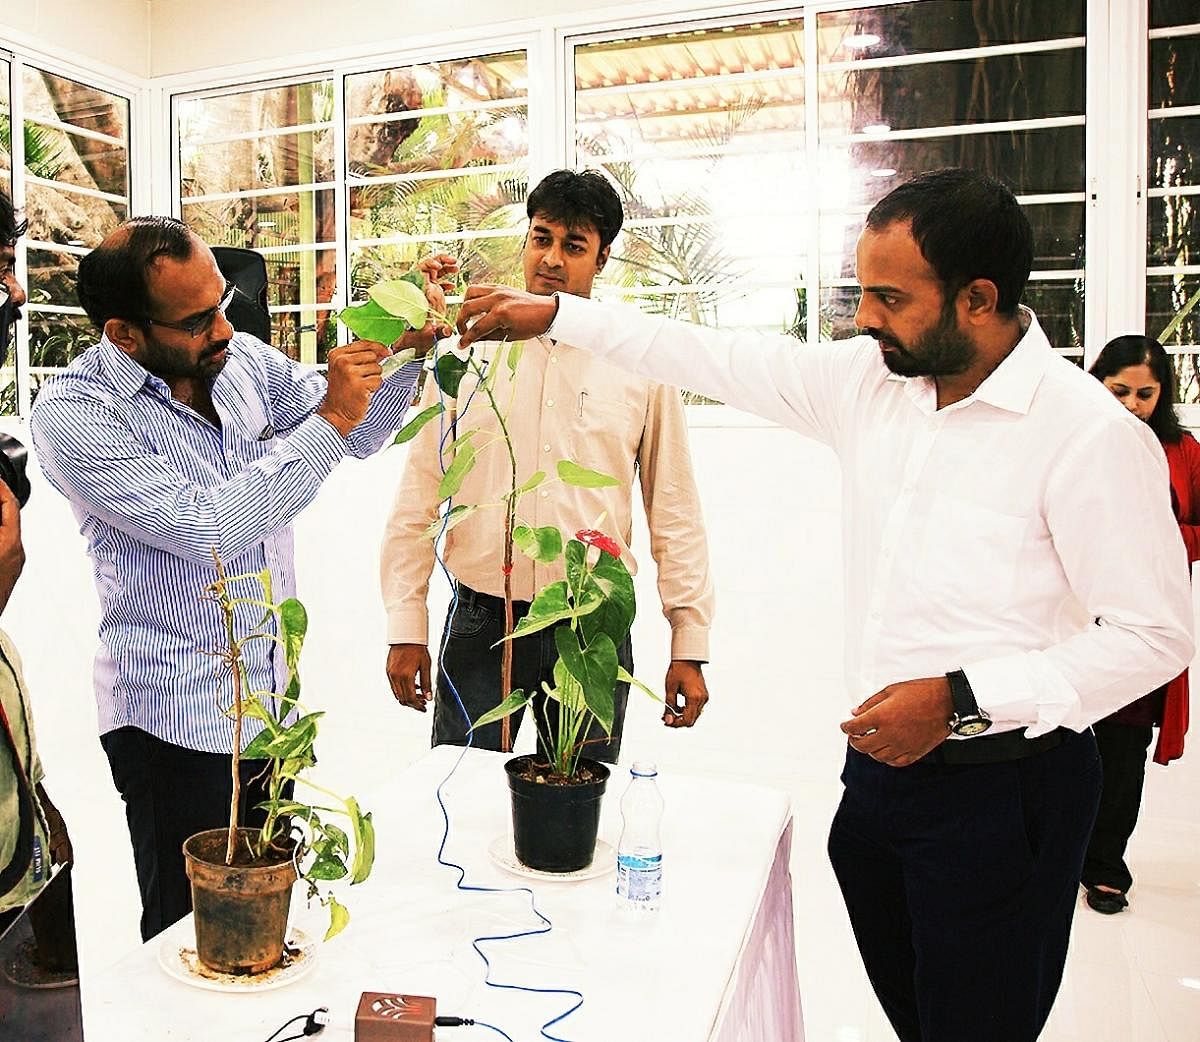 Project Vruksha Foundation is working on ‘Vrukshadhwani’, understanding the feelings of trees and plant. They are using a MIDI (Musical Instrument Digital Interface) which translates signals from trees to sounds and music.